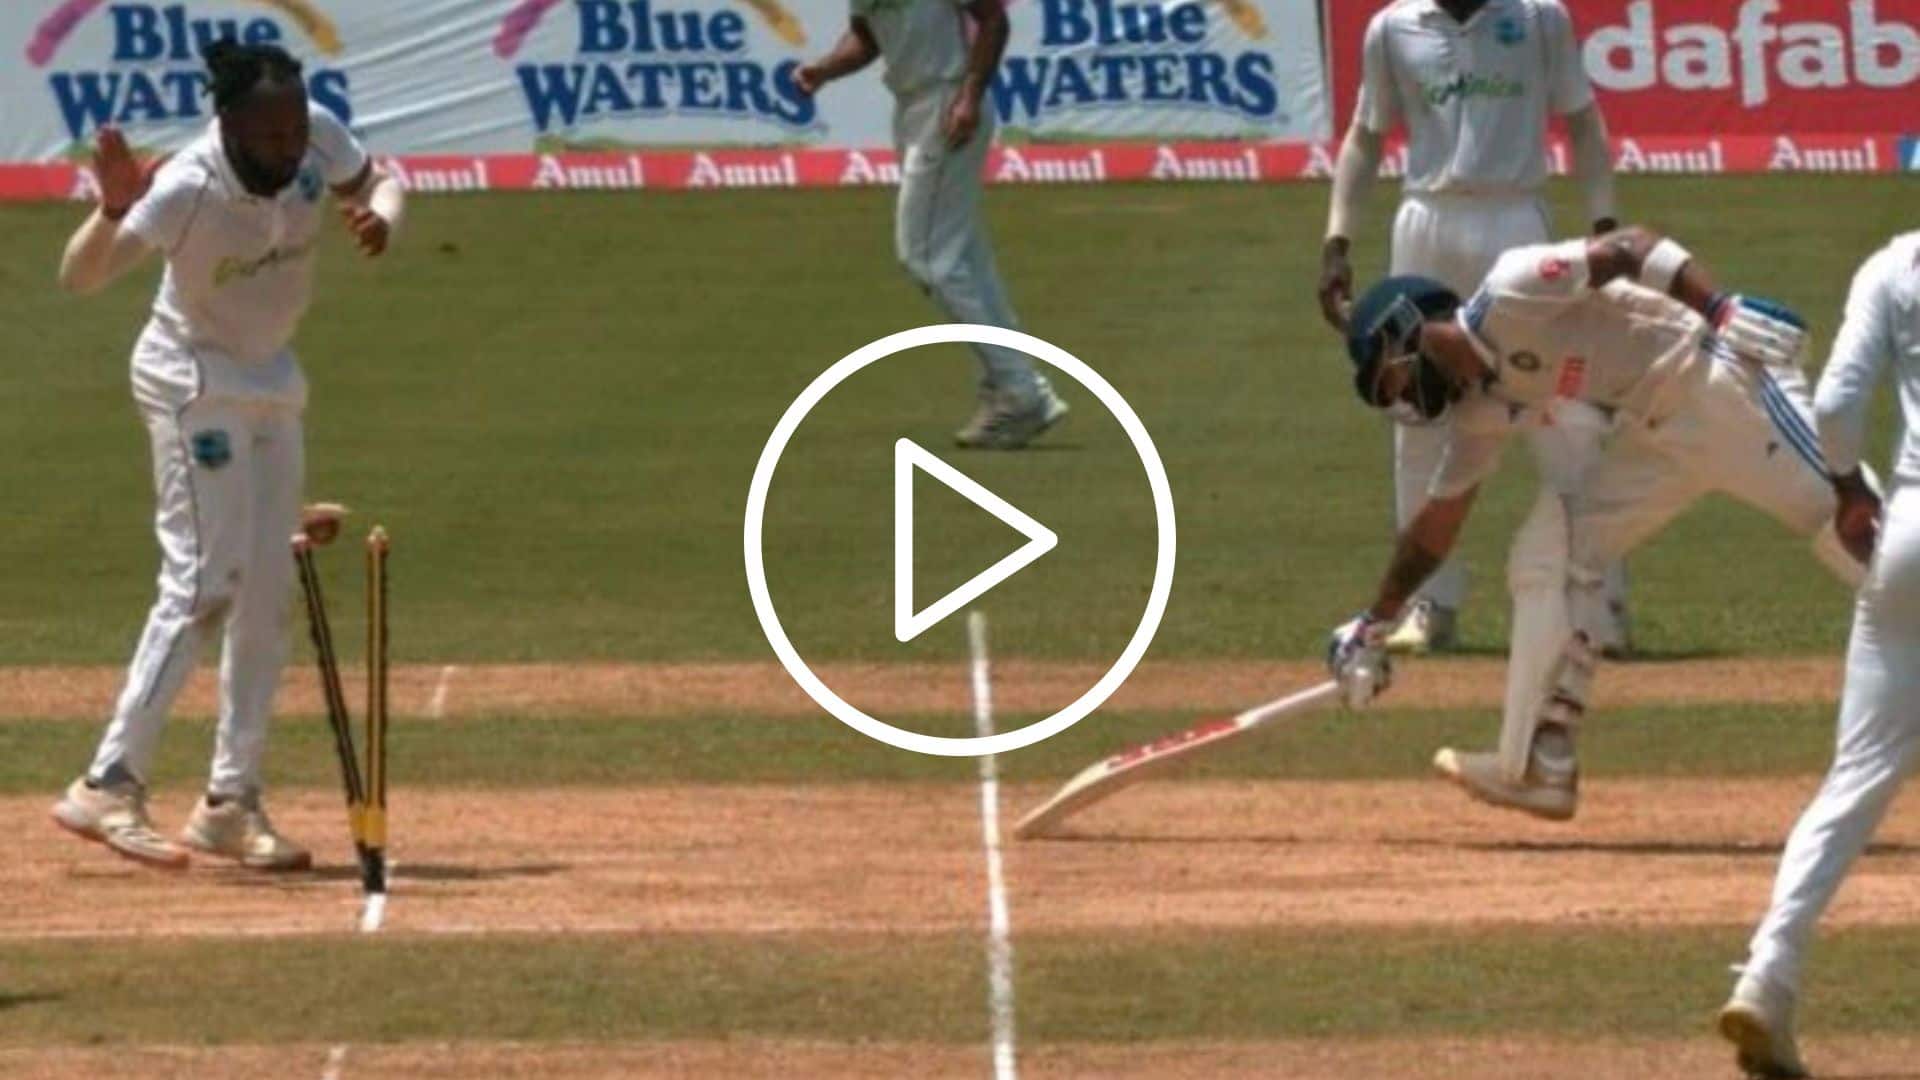 [Watch] Virat Kohli’s Heartbreaking Run Out After A Historic 29th Test Century